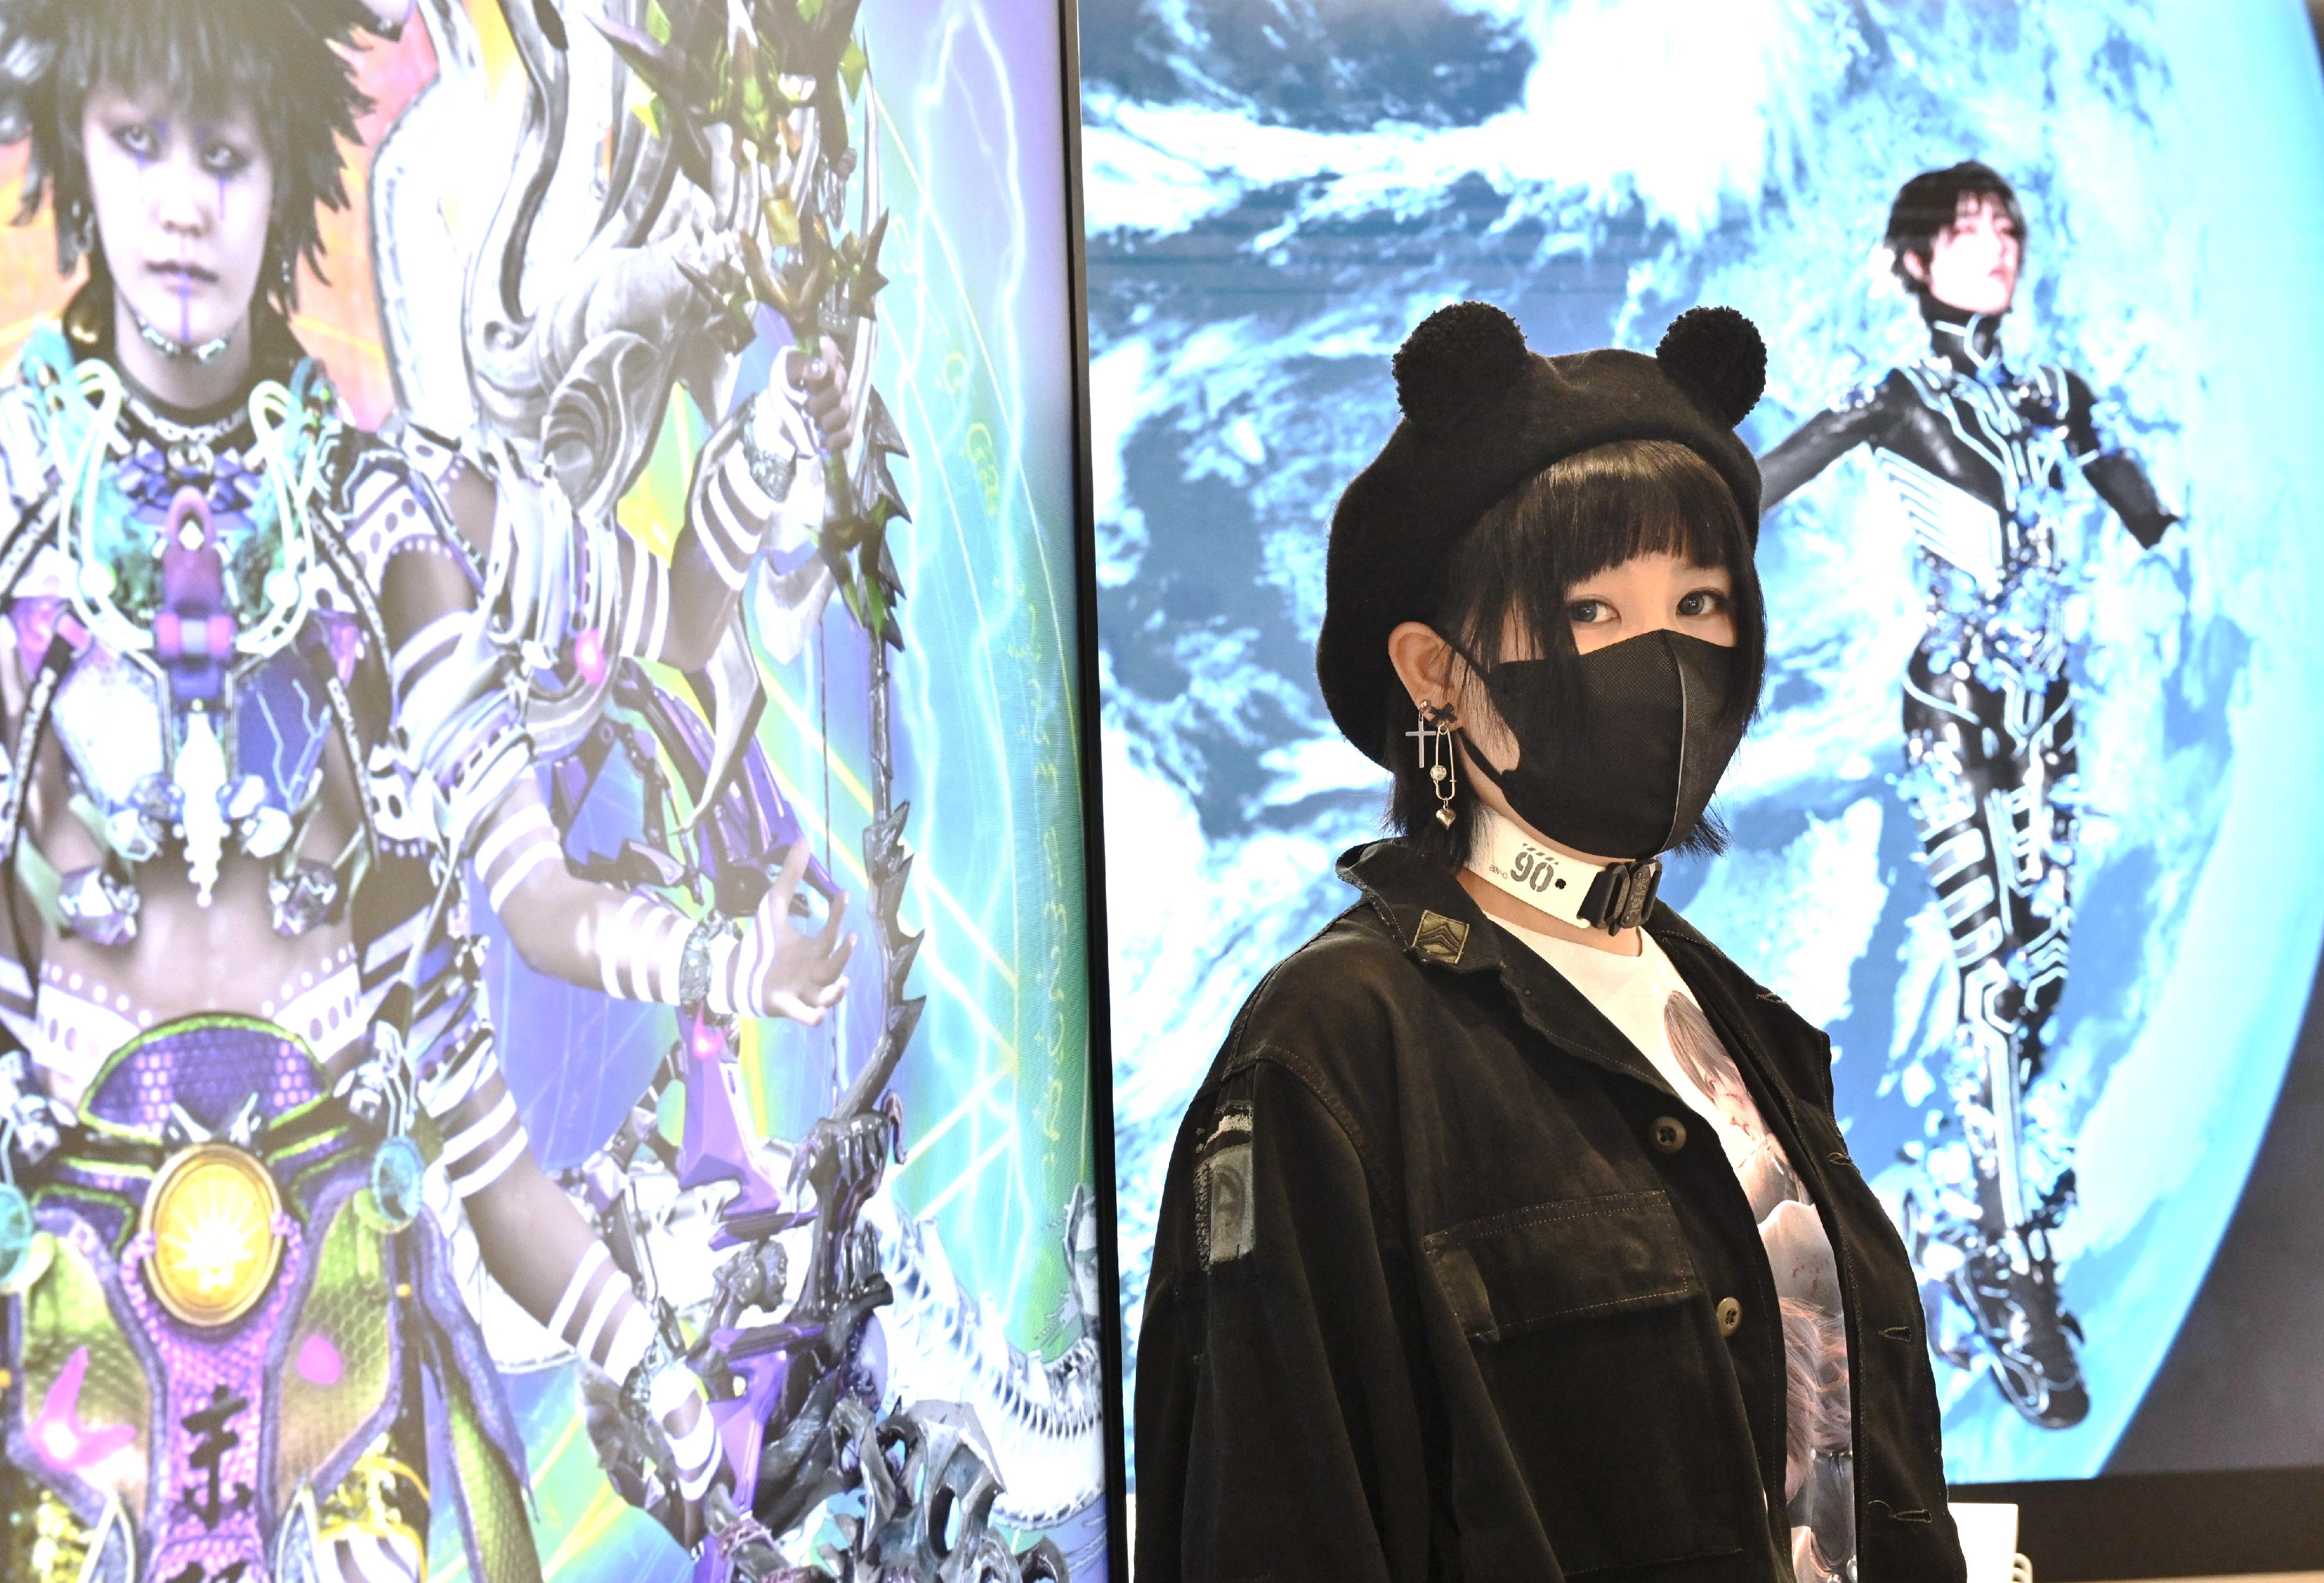 The "DOKU Hong Kong Experience Centre" exhibition by Mainland new media artist Lu Yang will be on display from tomorrow (March 18) in Oi! Glassie. Photo shows the artist Lu with the artwork.